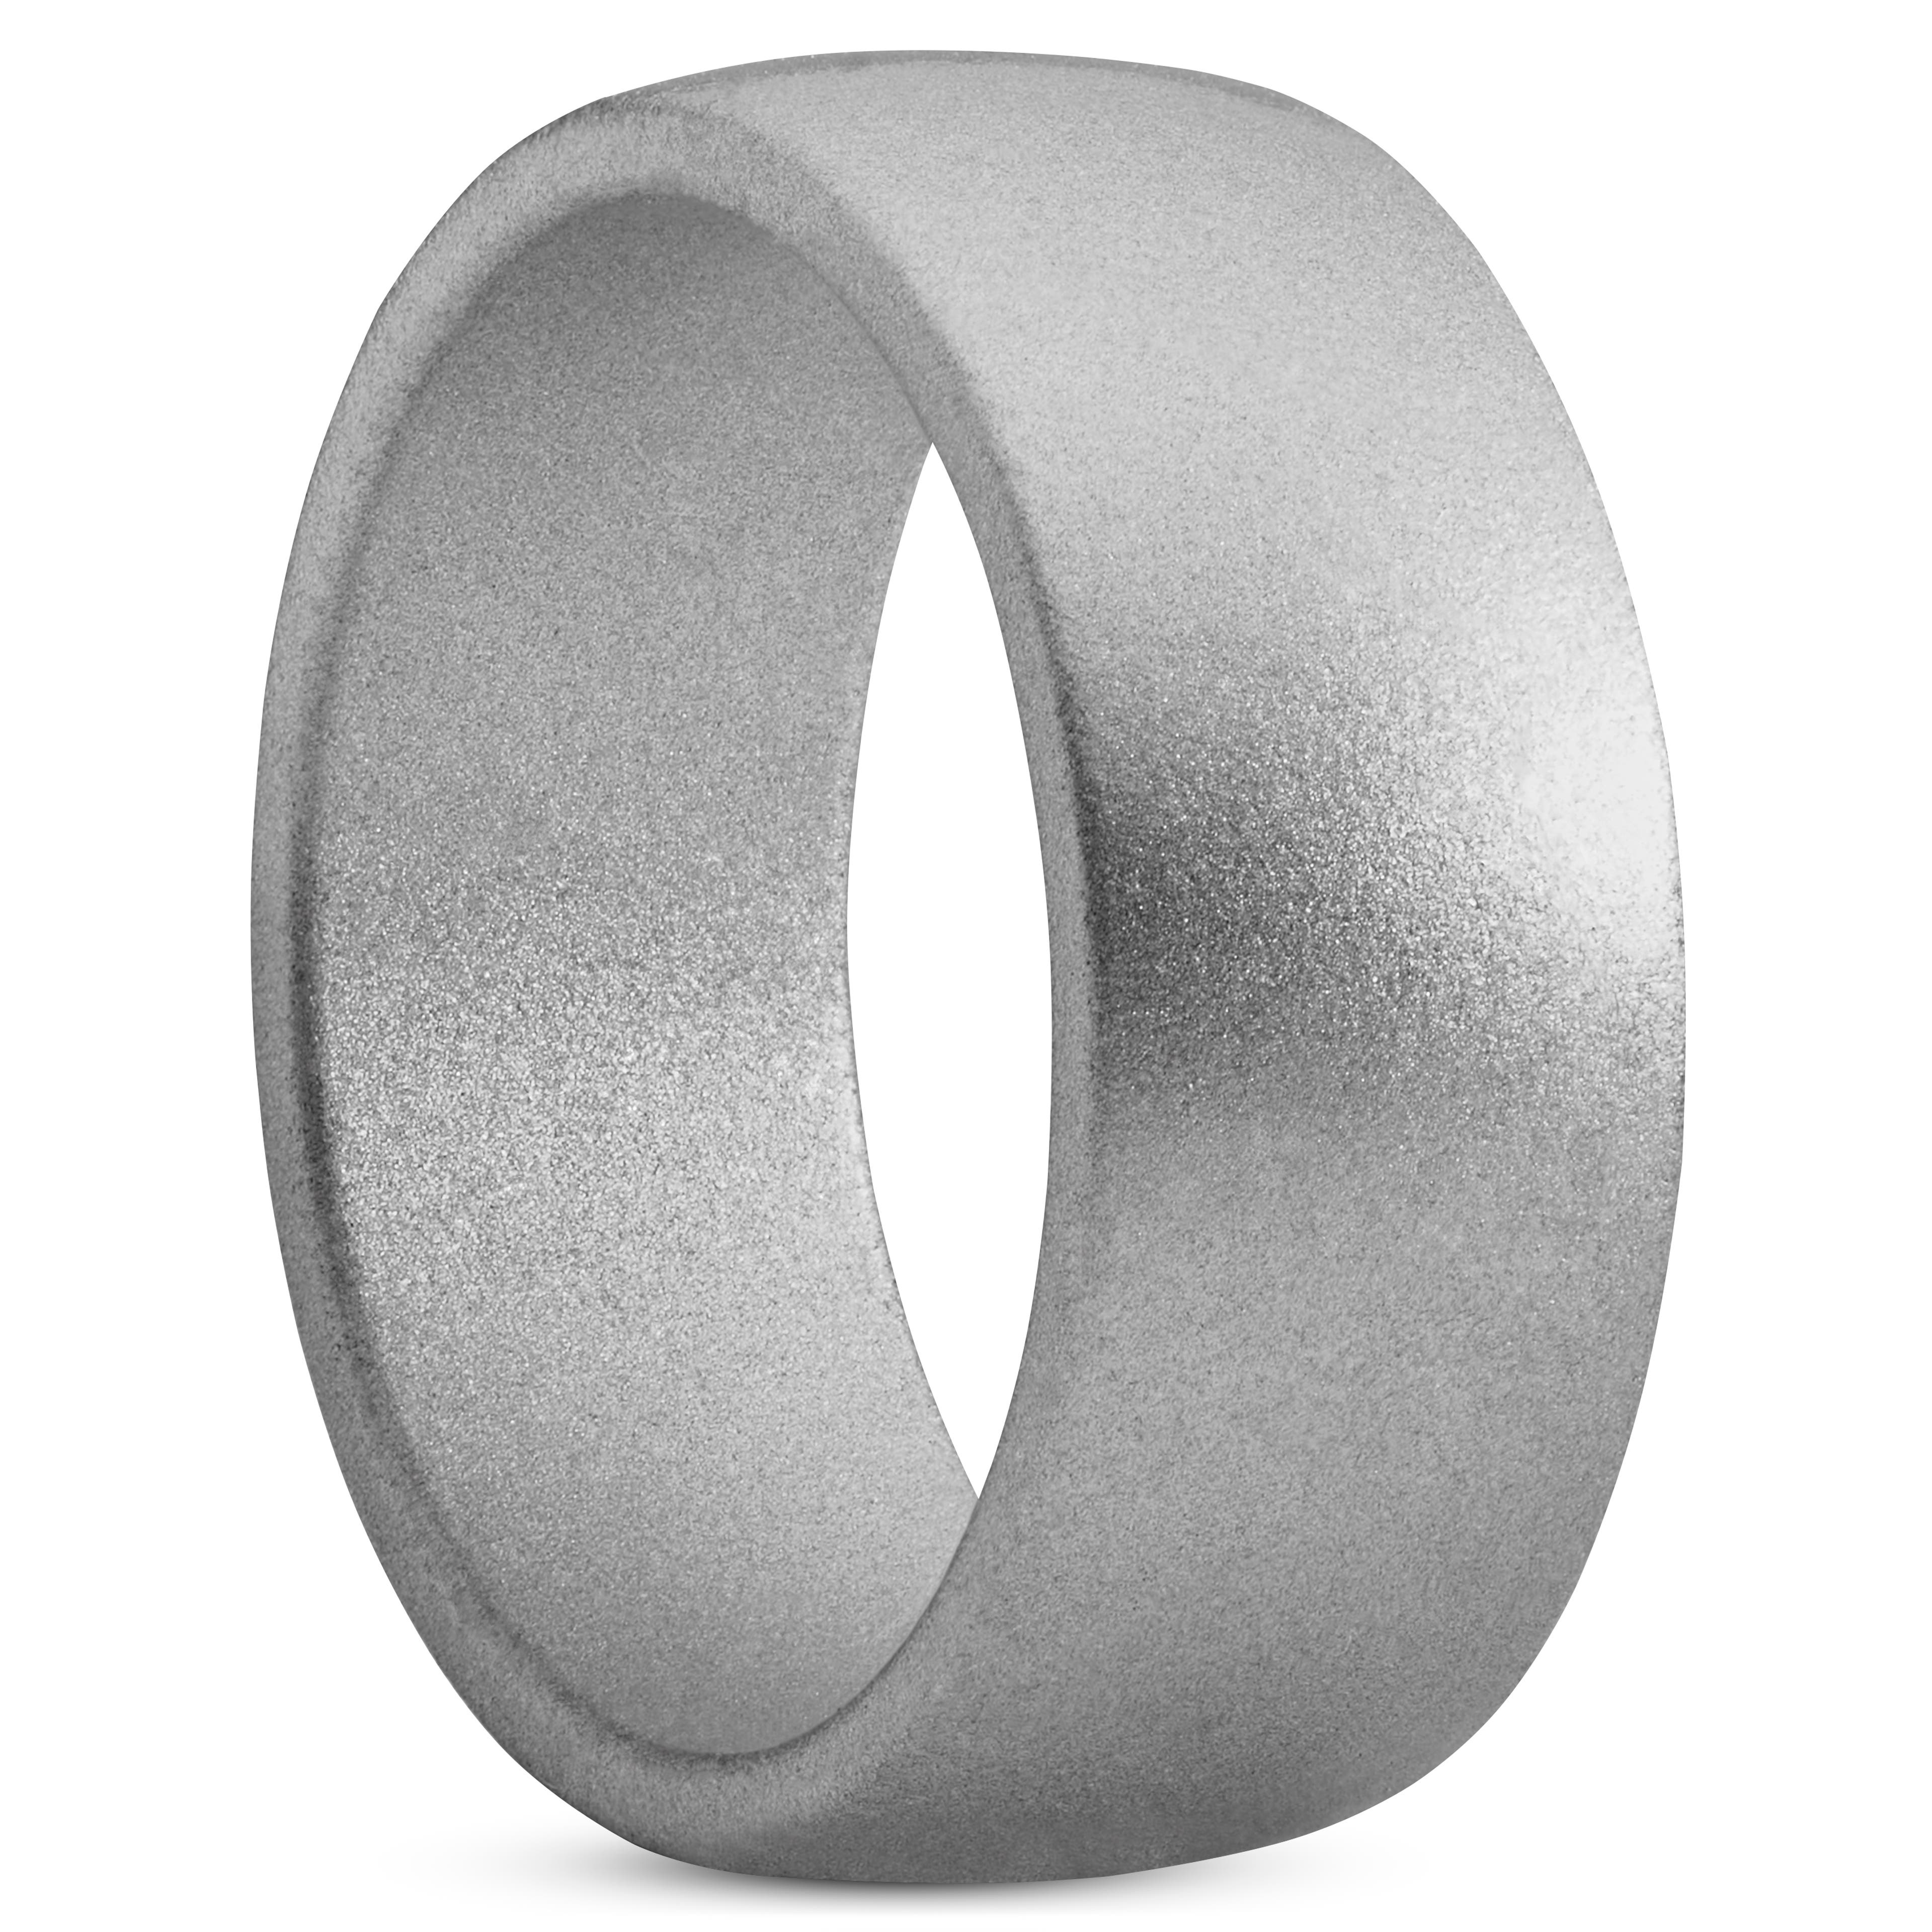 8,7 mm Silver-Tone Silicone Classic & Simple Ring